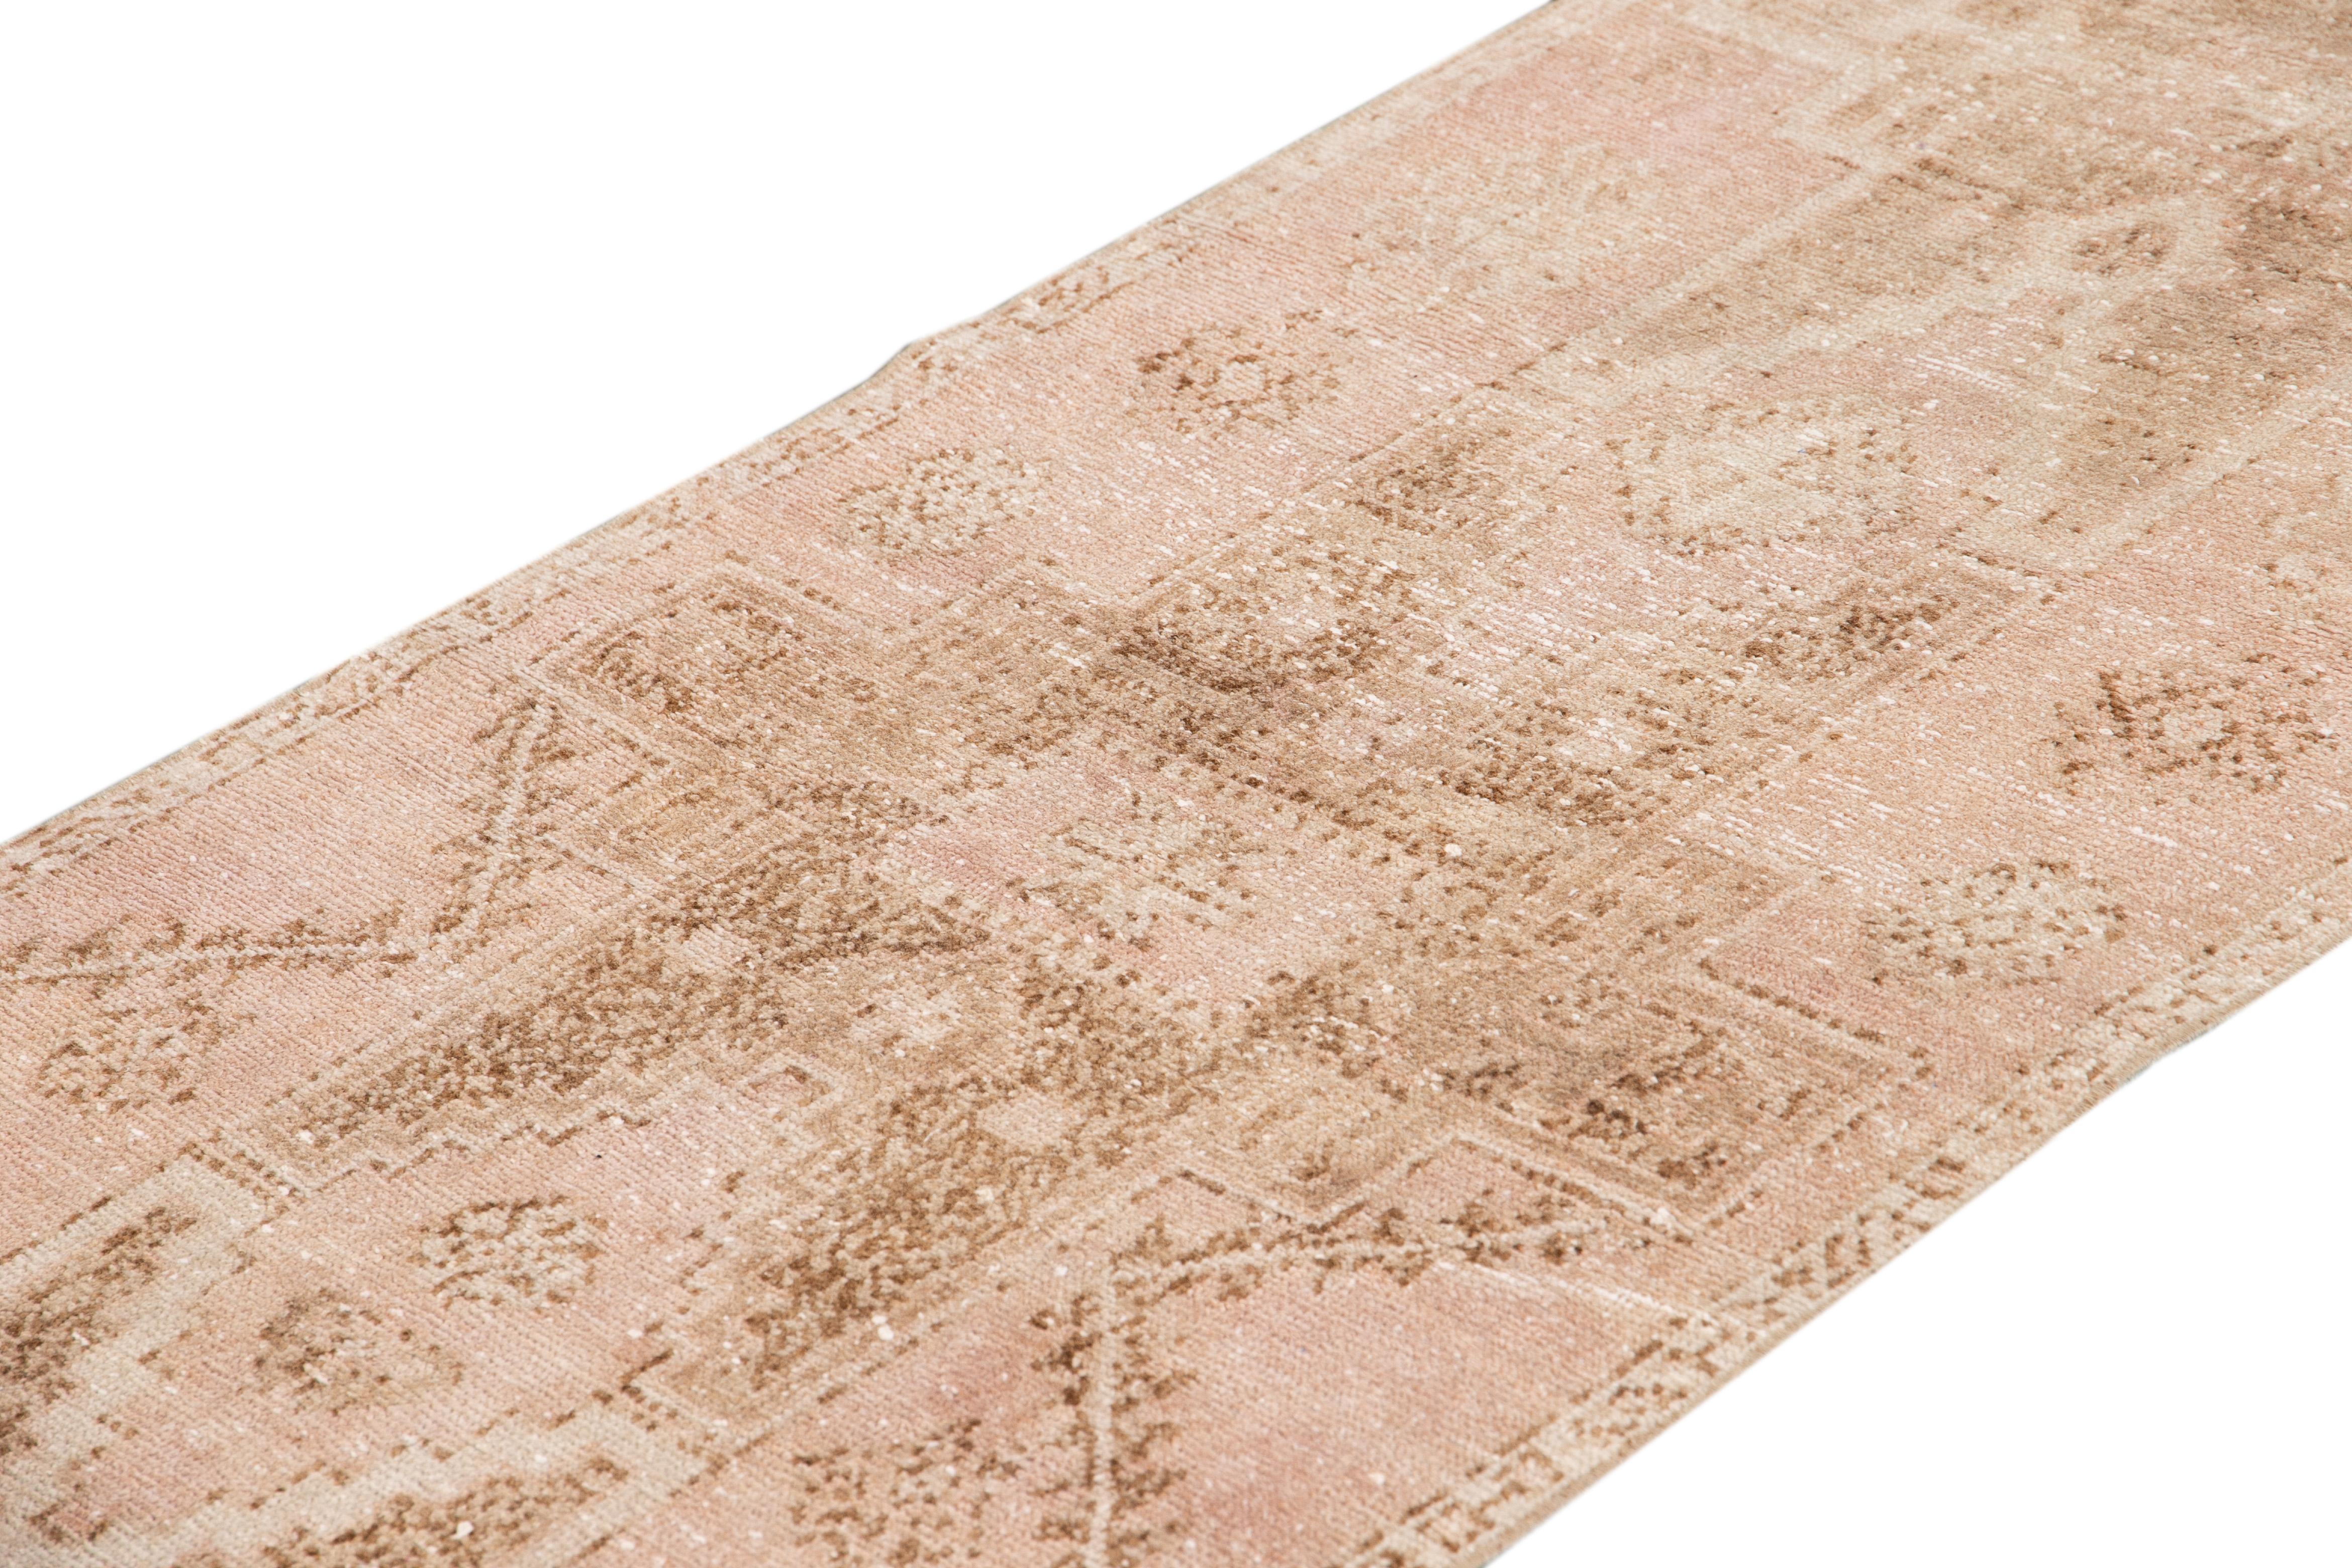 Beautiful antique runner rugs, hand knotted wool with a blush field, tan and light brown accents in an all-over multi medallion geometric design.

This rug measures 2' 9